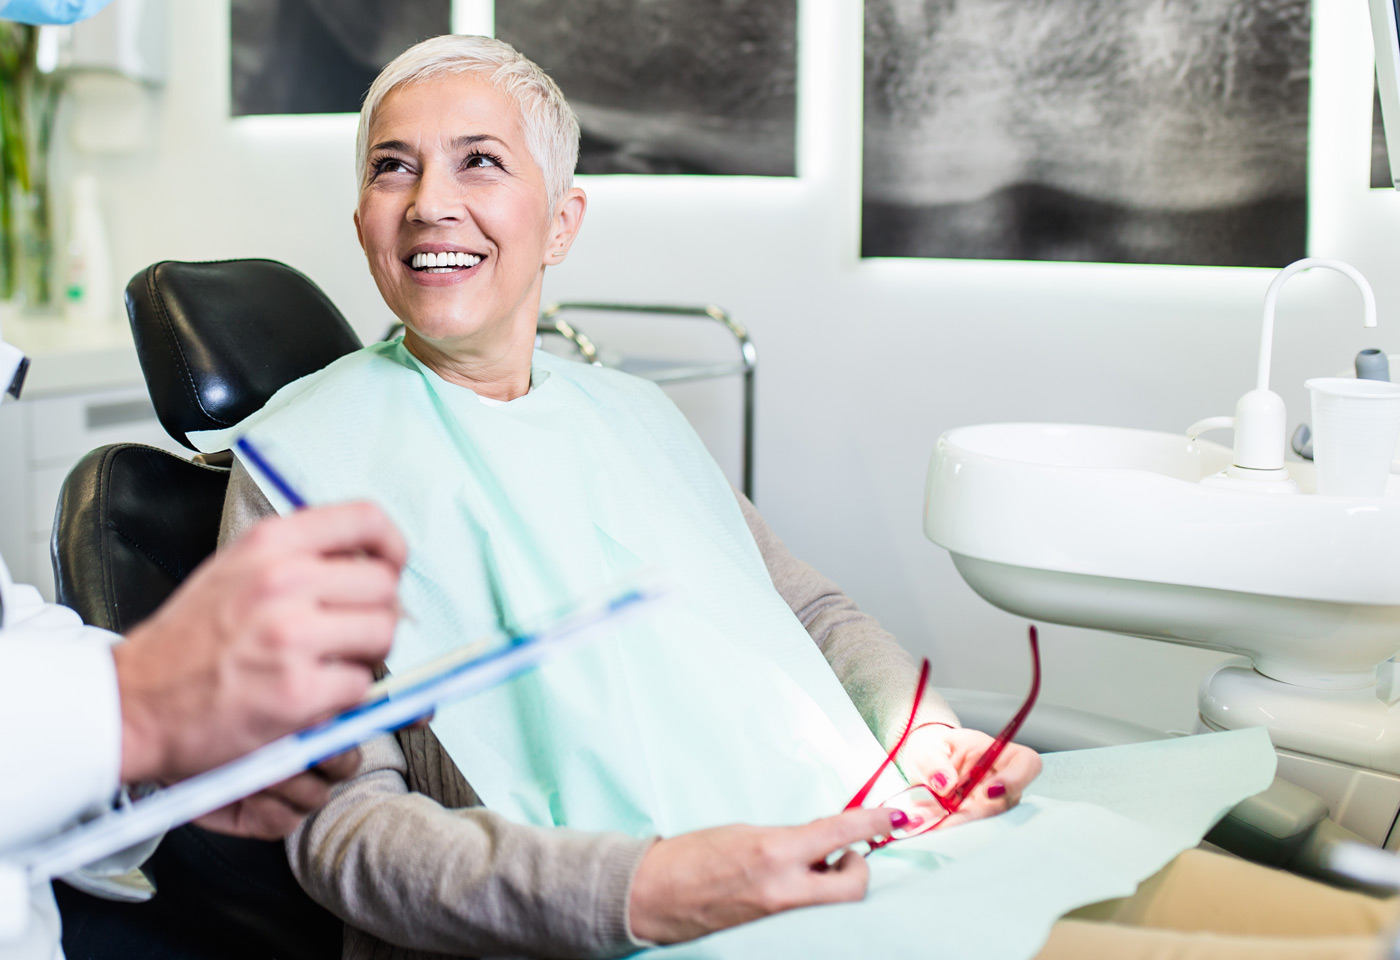 A woman sitting in a dental chair, smiling and holding her eyeglasses, looks towards a dentist who is holding a pen and clipboard, writing or discussing a dental procedure.